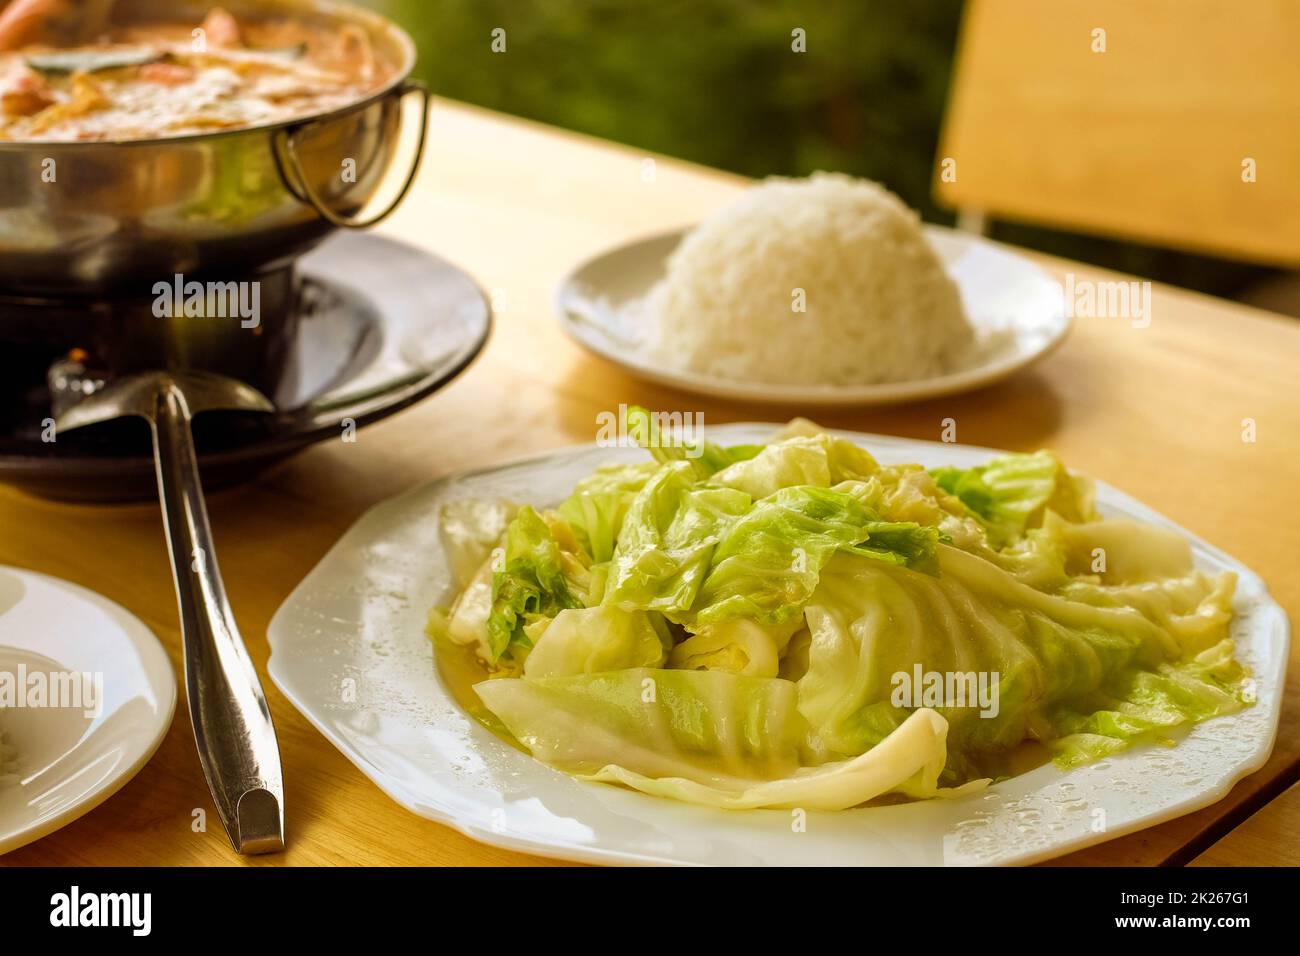 Fried Cabbage with Fish Sauce food traditional lunch object still life image Stock Photo